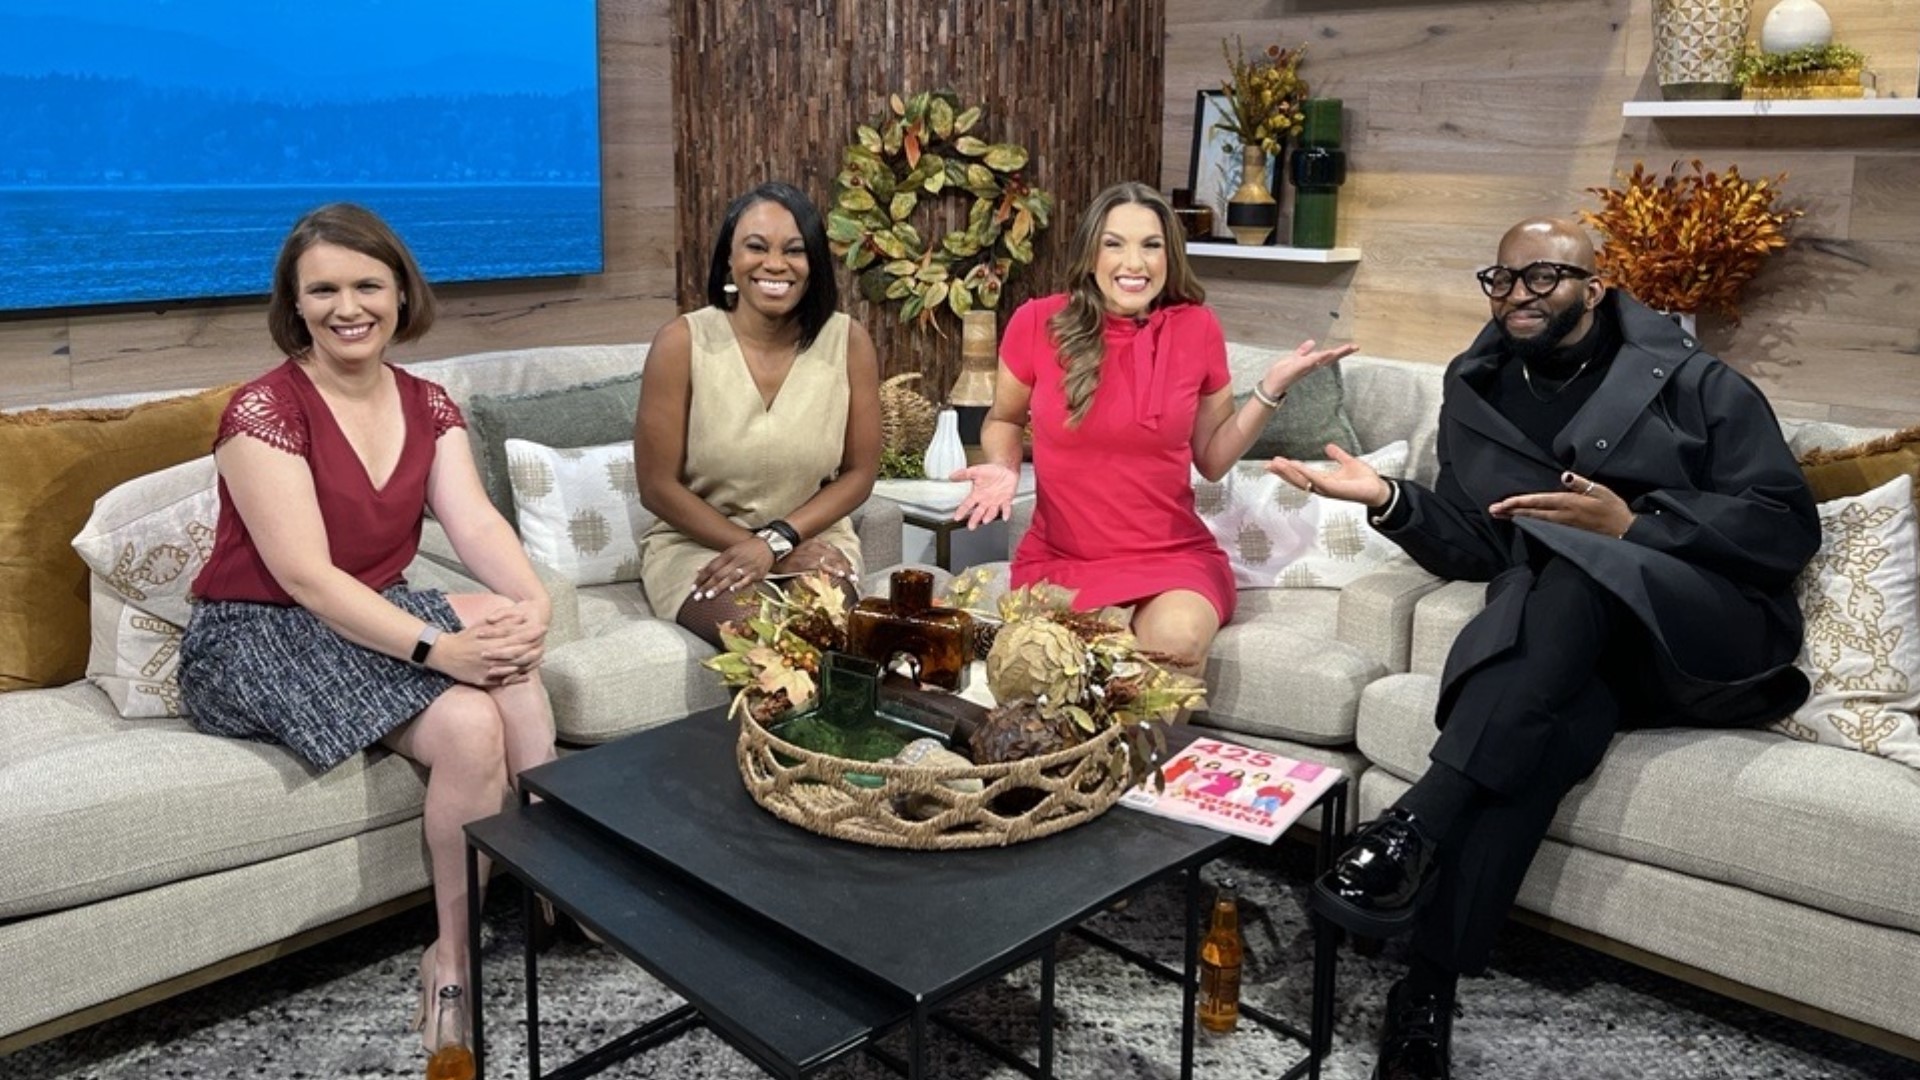 Amity is joined by author of “Fill Your Tank” Laeisha Howard, TV and Podcast Host Jay Martin JR and New Day Producer Rebecca Perry to talk about what inspires them.